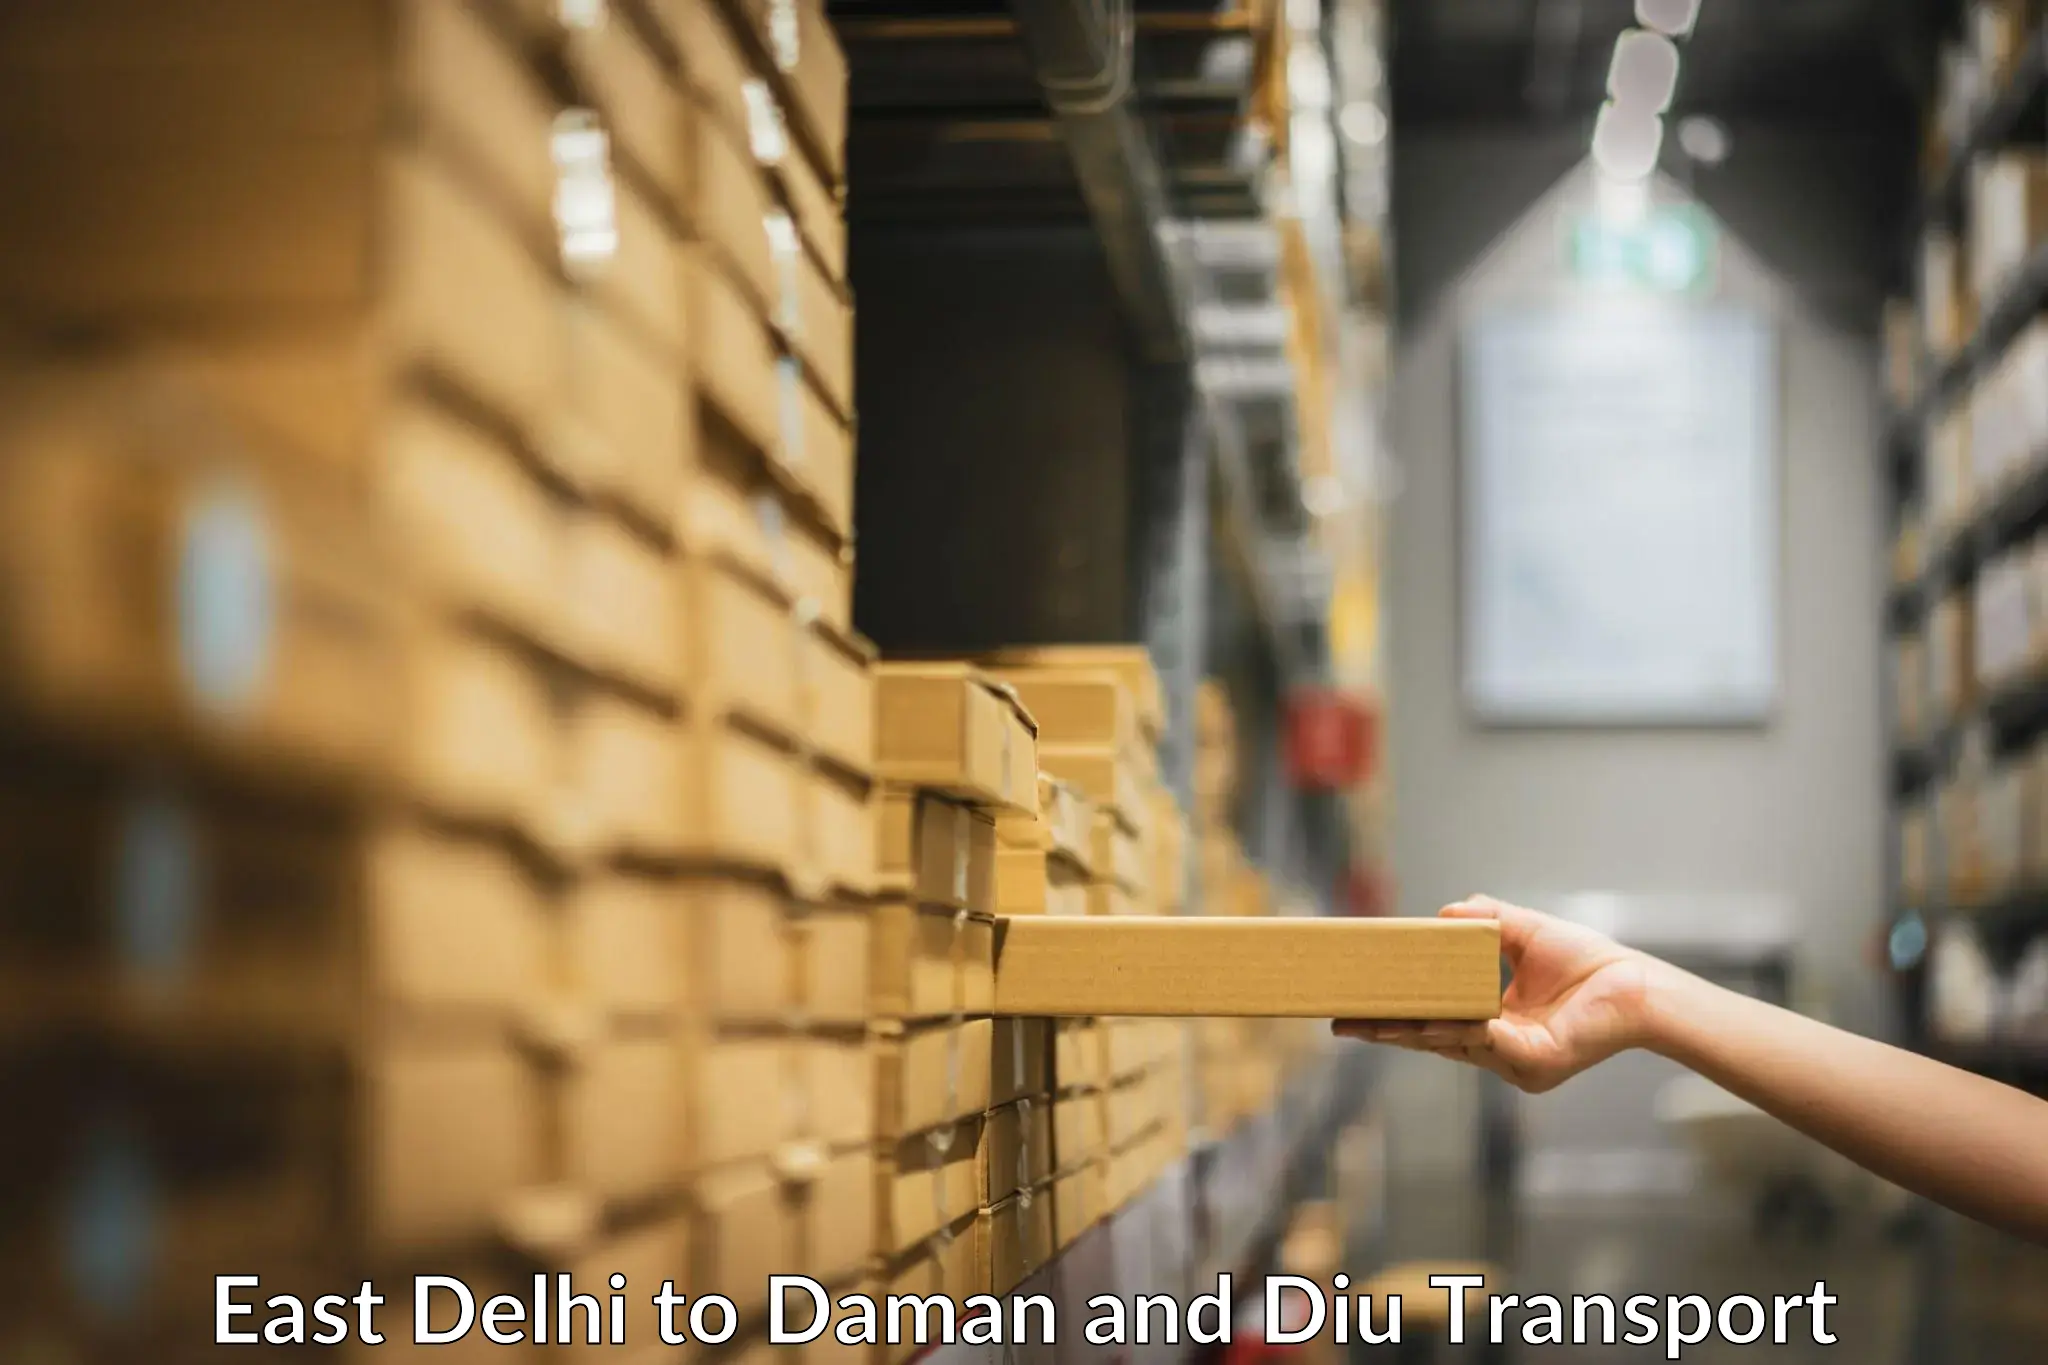 Delivery service East Delhi to Daman and Diu